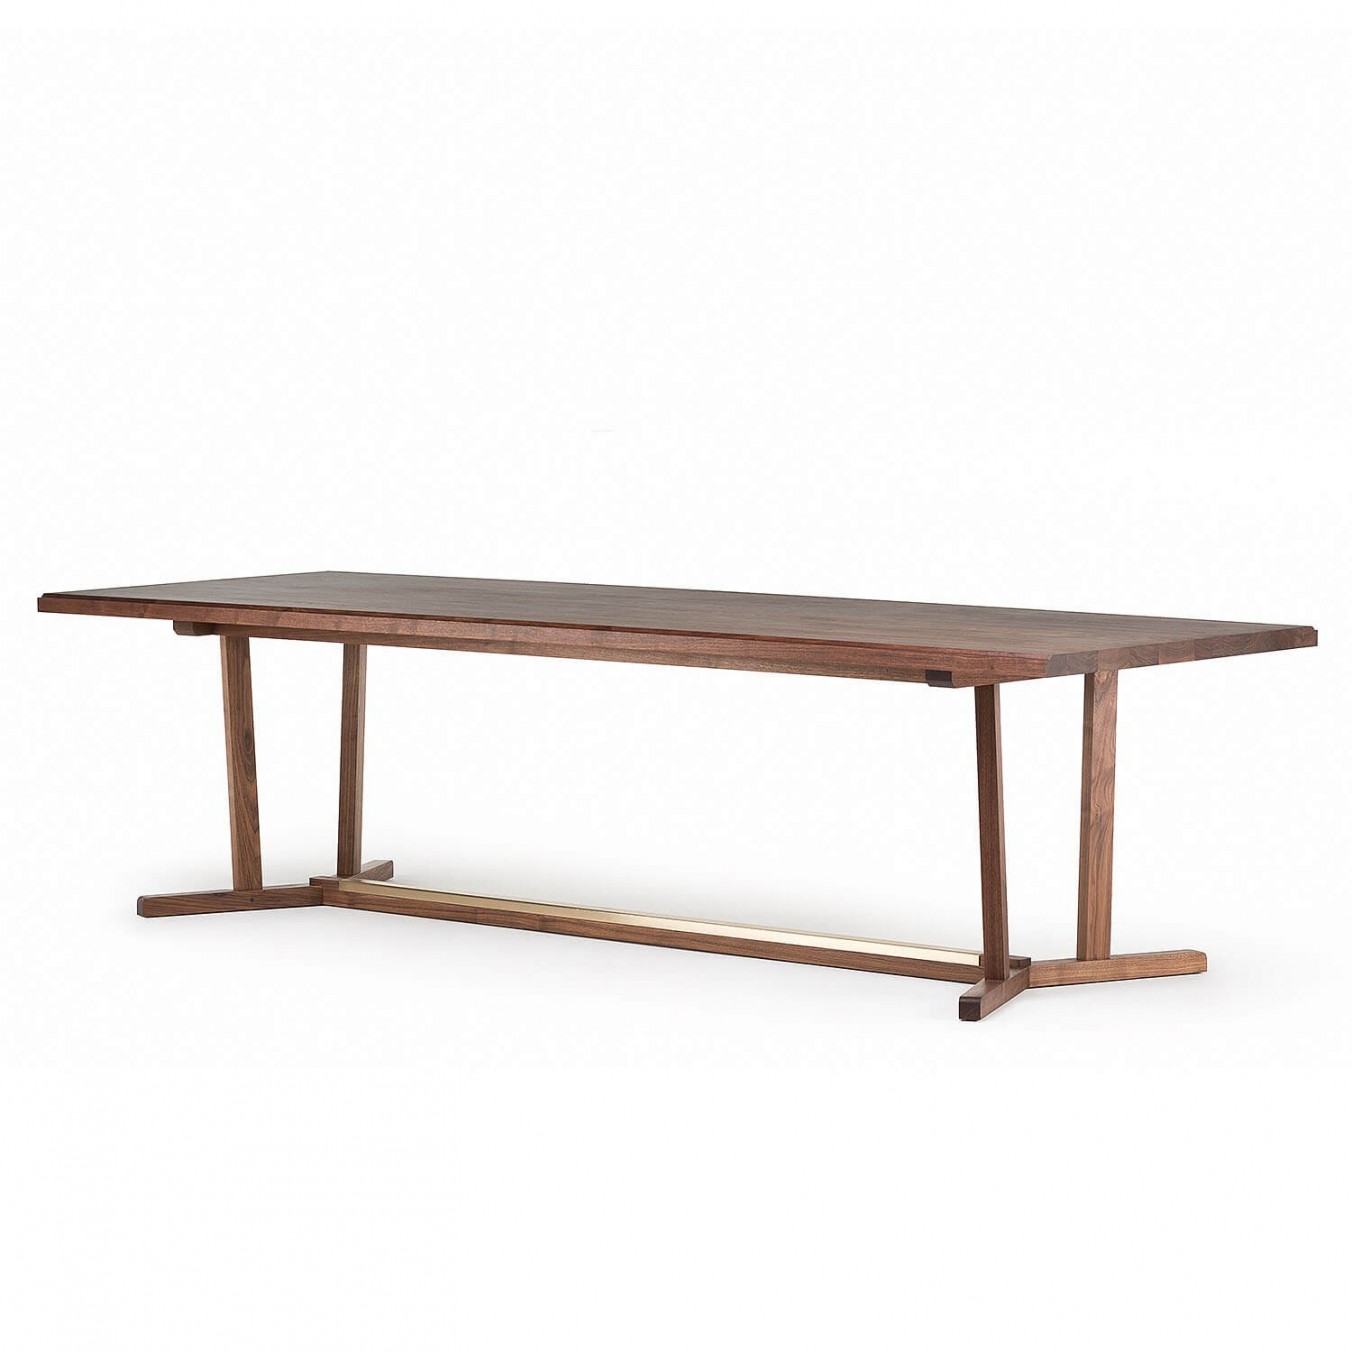 SHAKER DINING TABLE